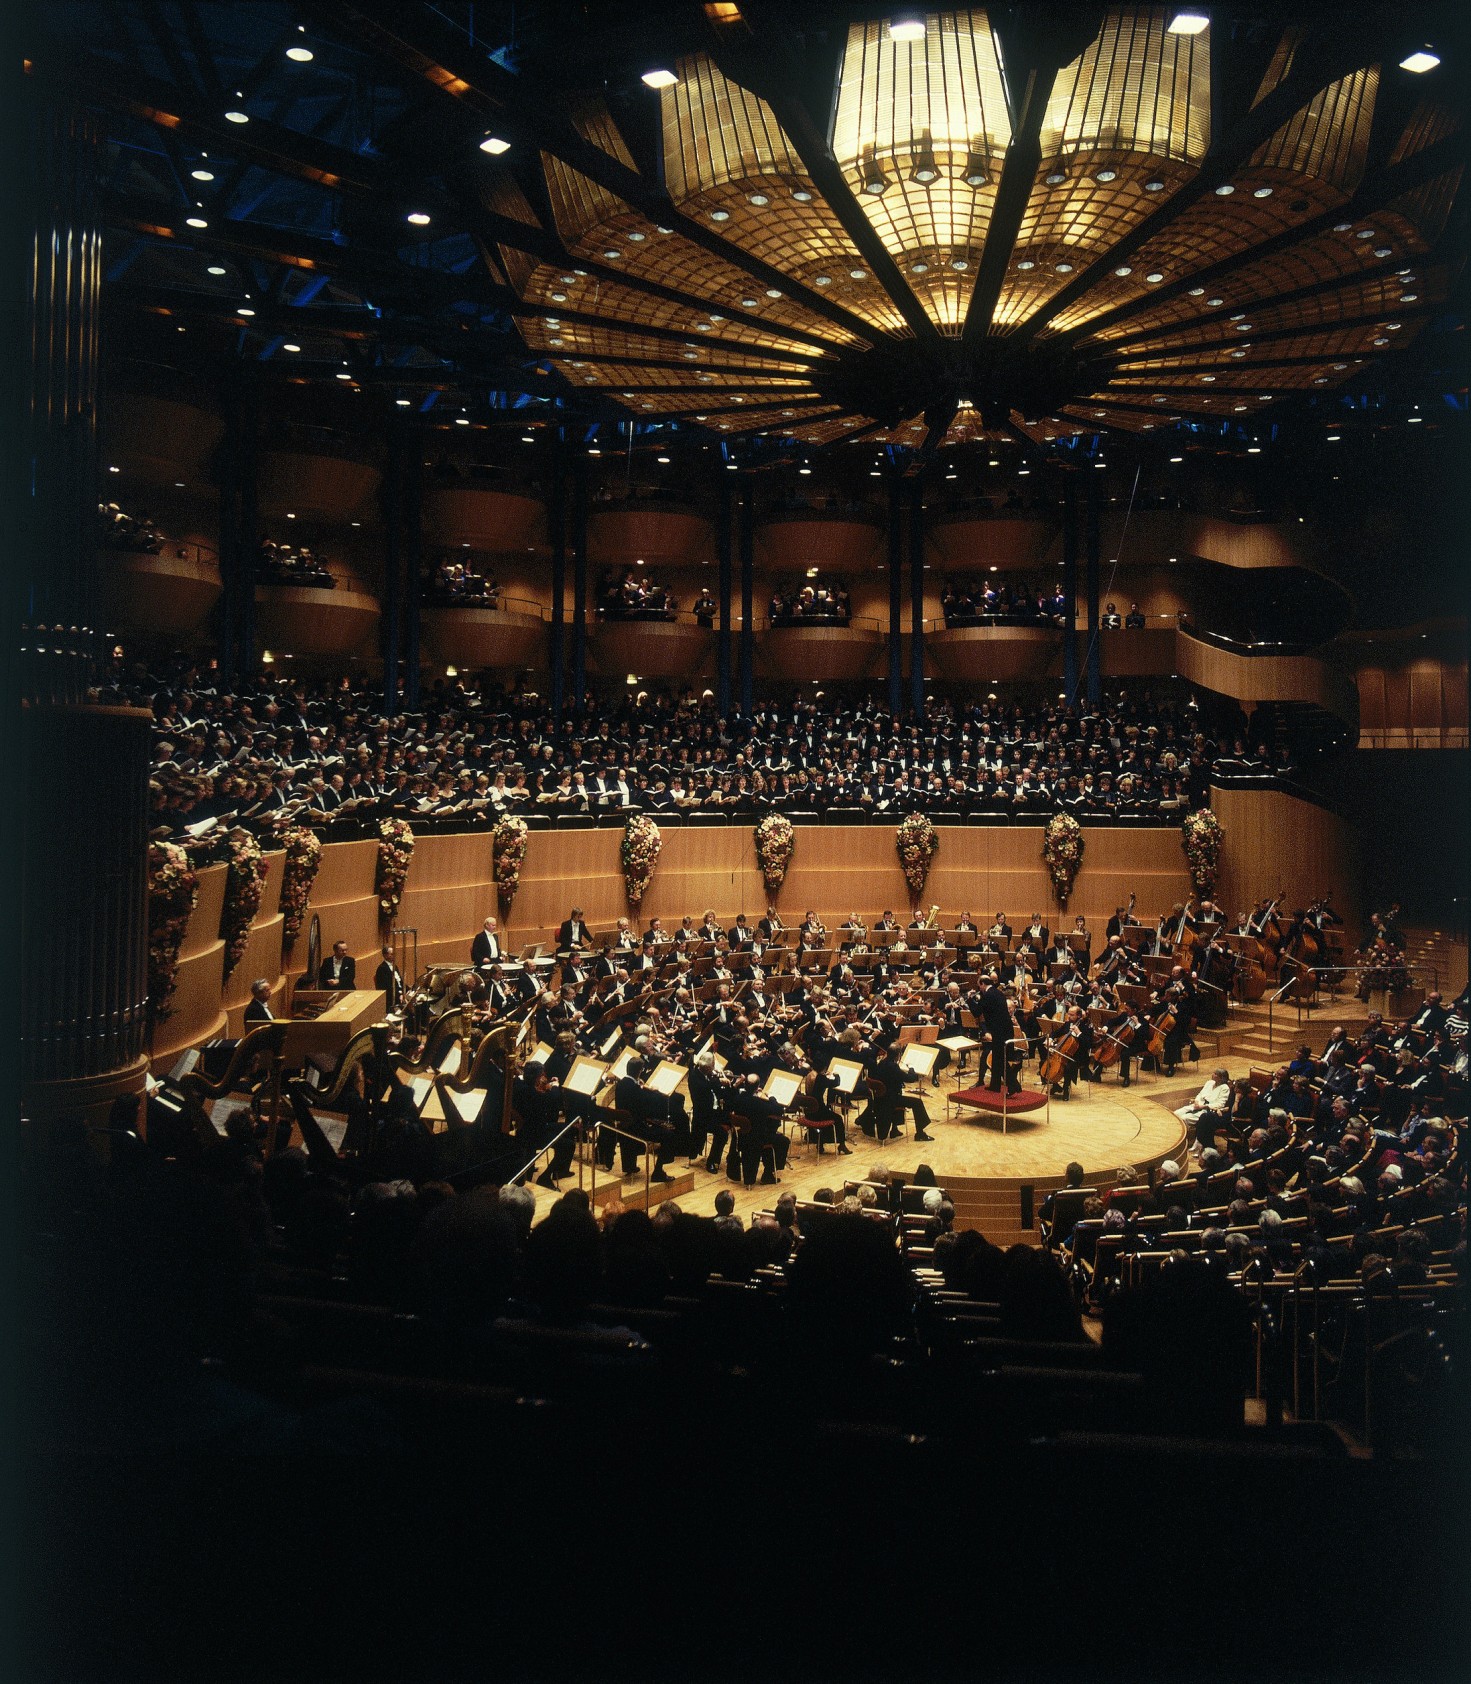 1986 opening of Cologne Philharmonie with Mahler 8